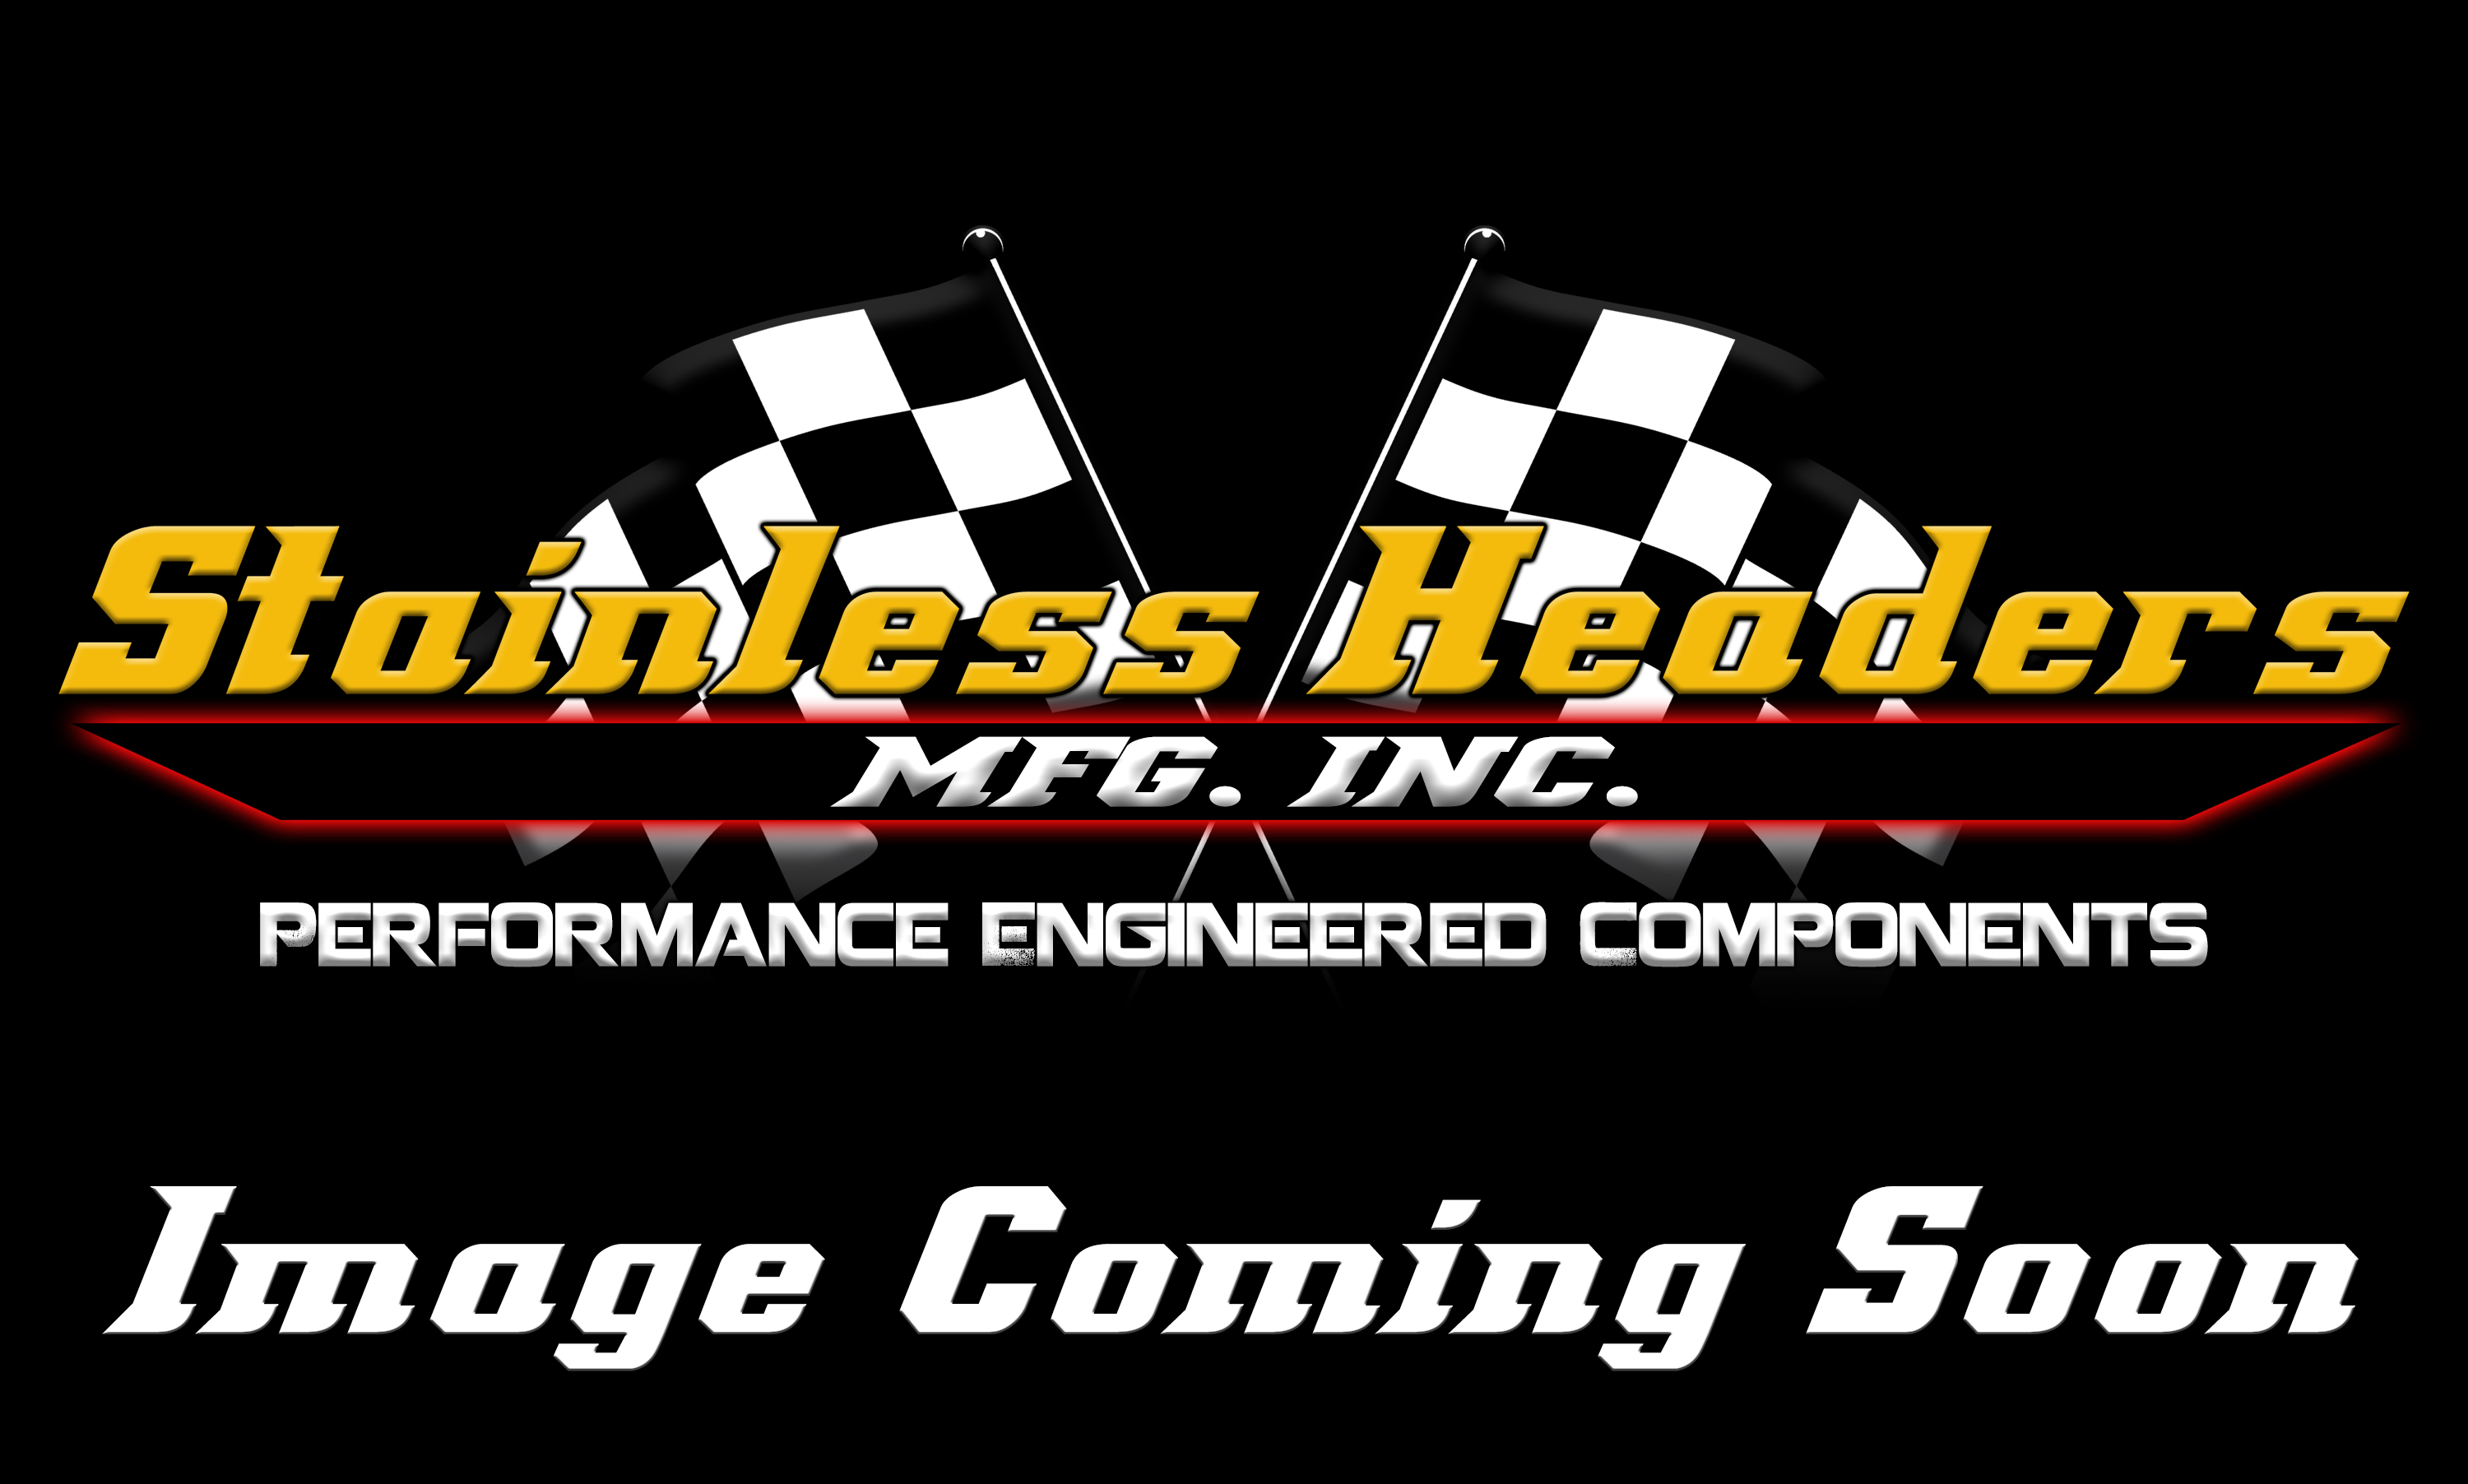 Stainless Headers - 2 1/4" Primary 3 into 1 Performance Merge Collector-16ga 304ss